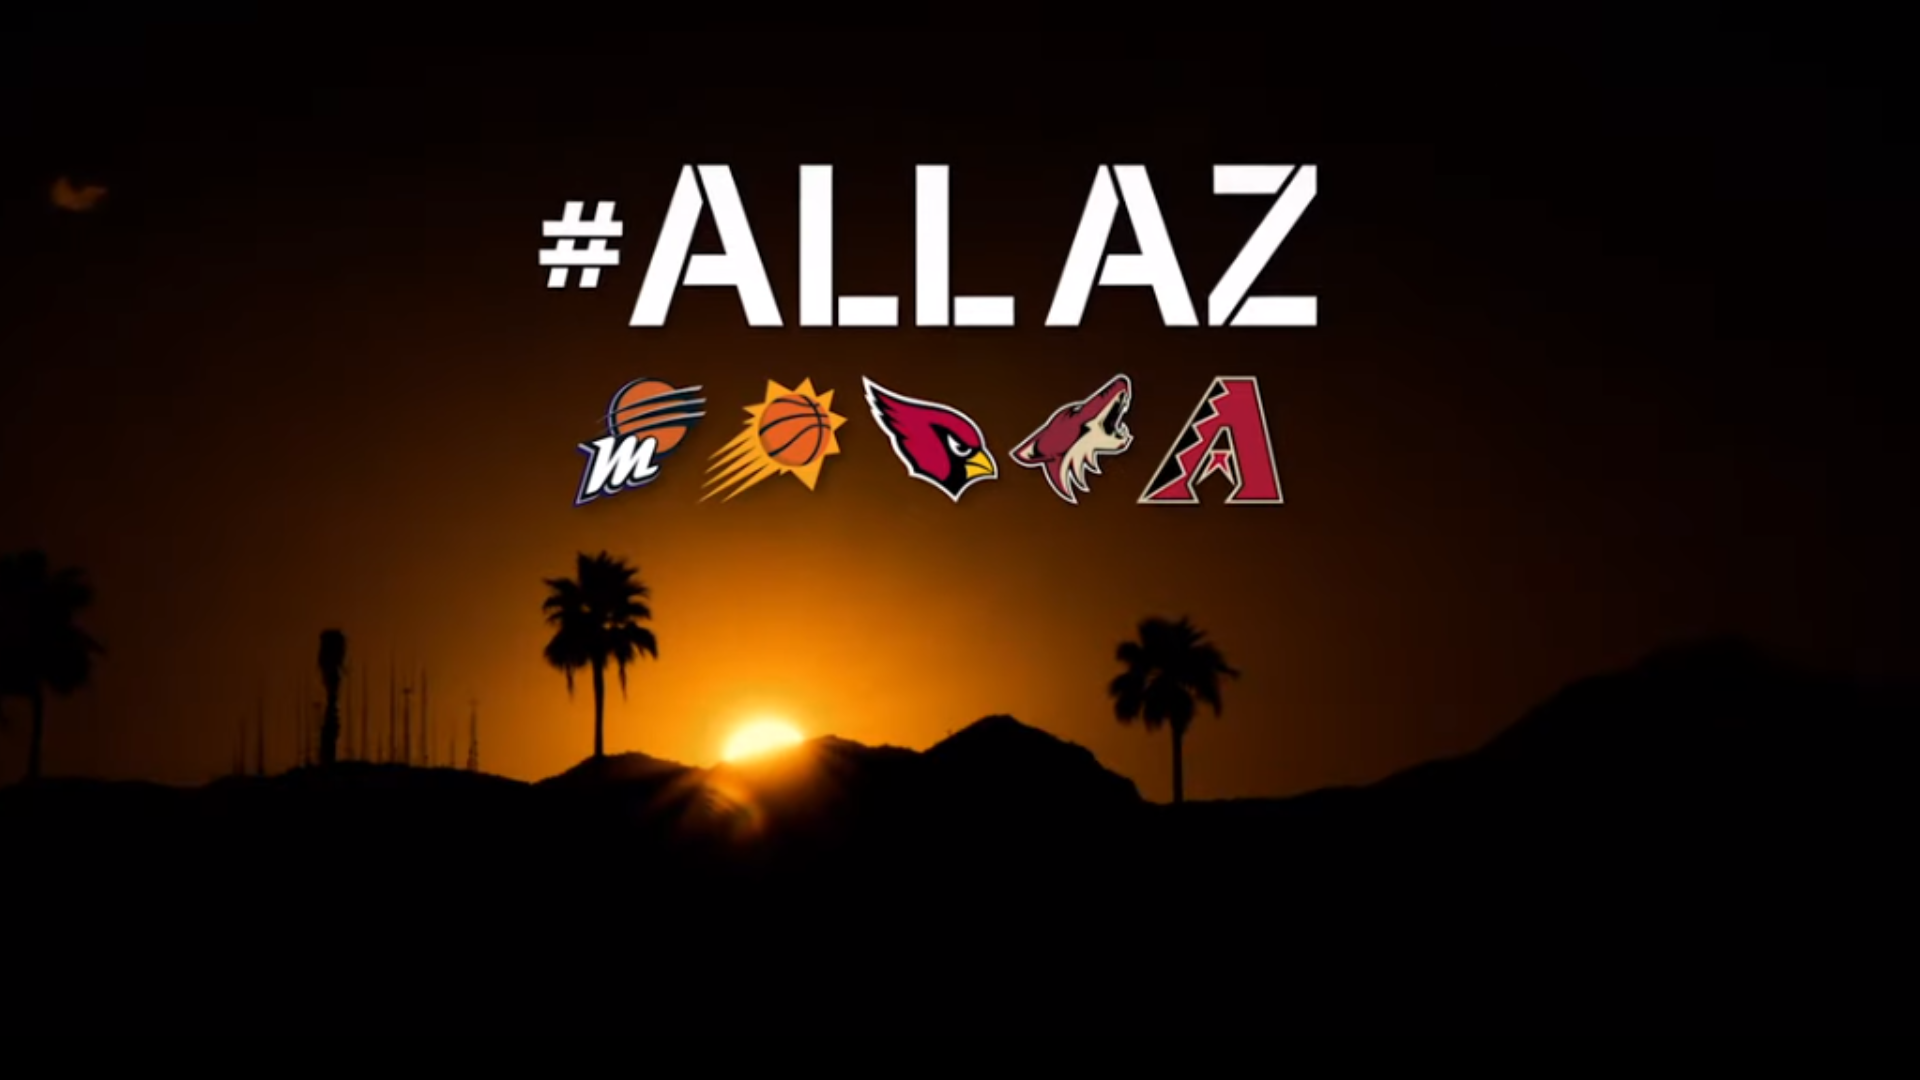 The Cardinals, Coyotes, D-backs, Suns and Mercury teamed up for a video to spread positivity and hope during the pandemic and give praise to those on the frontlines.